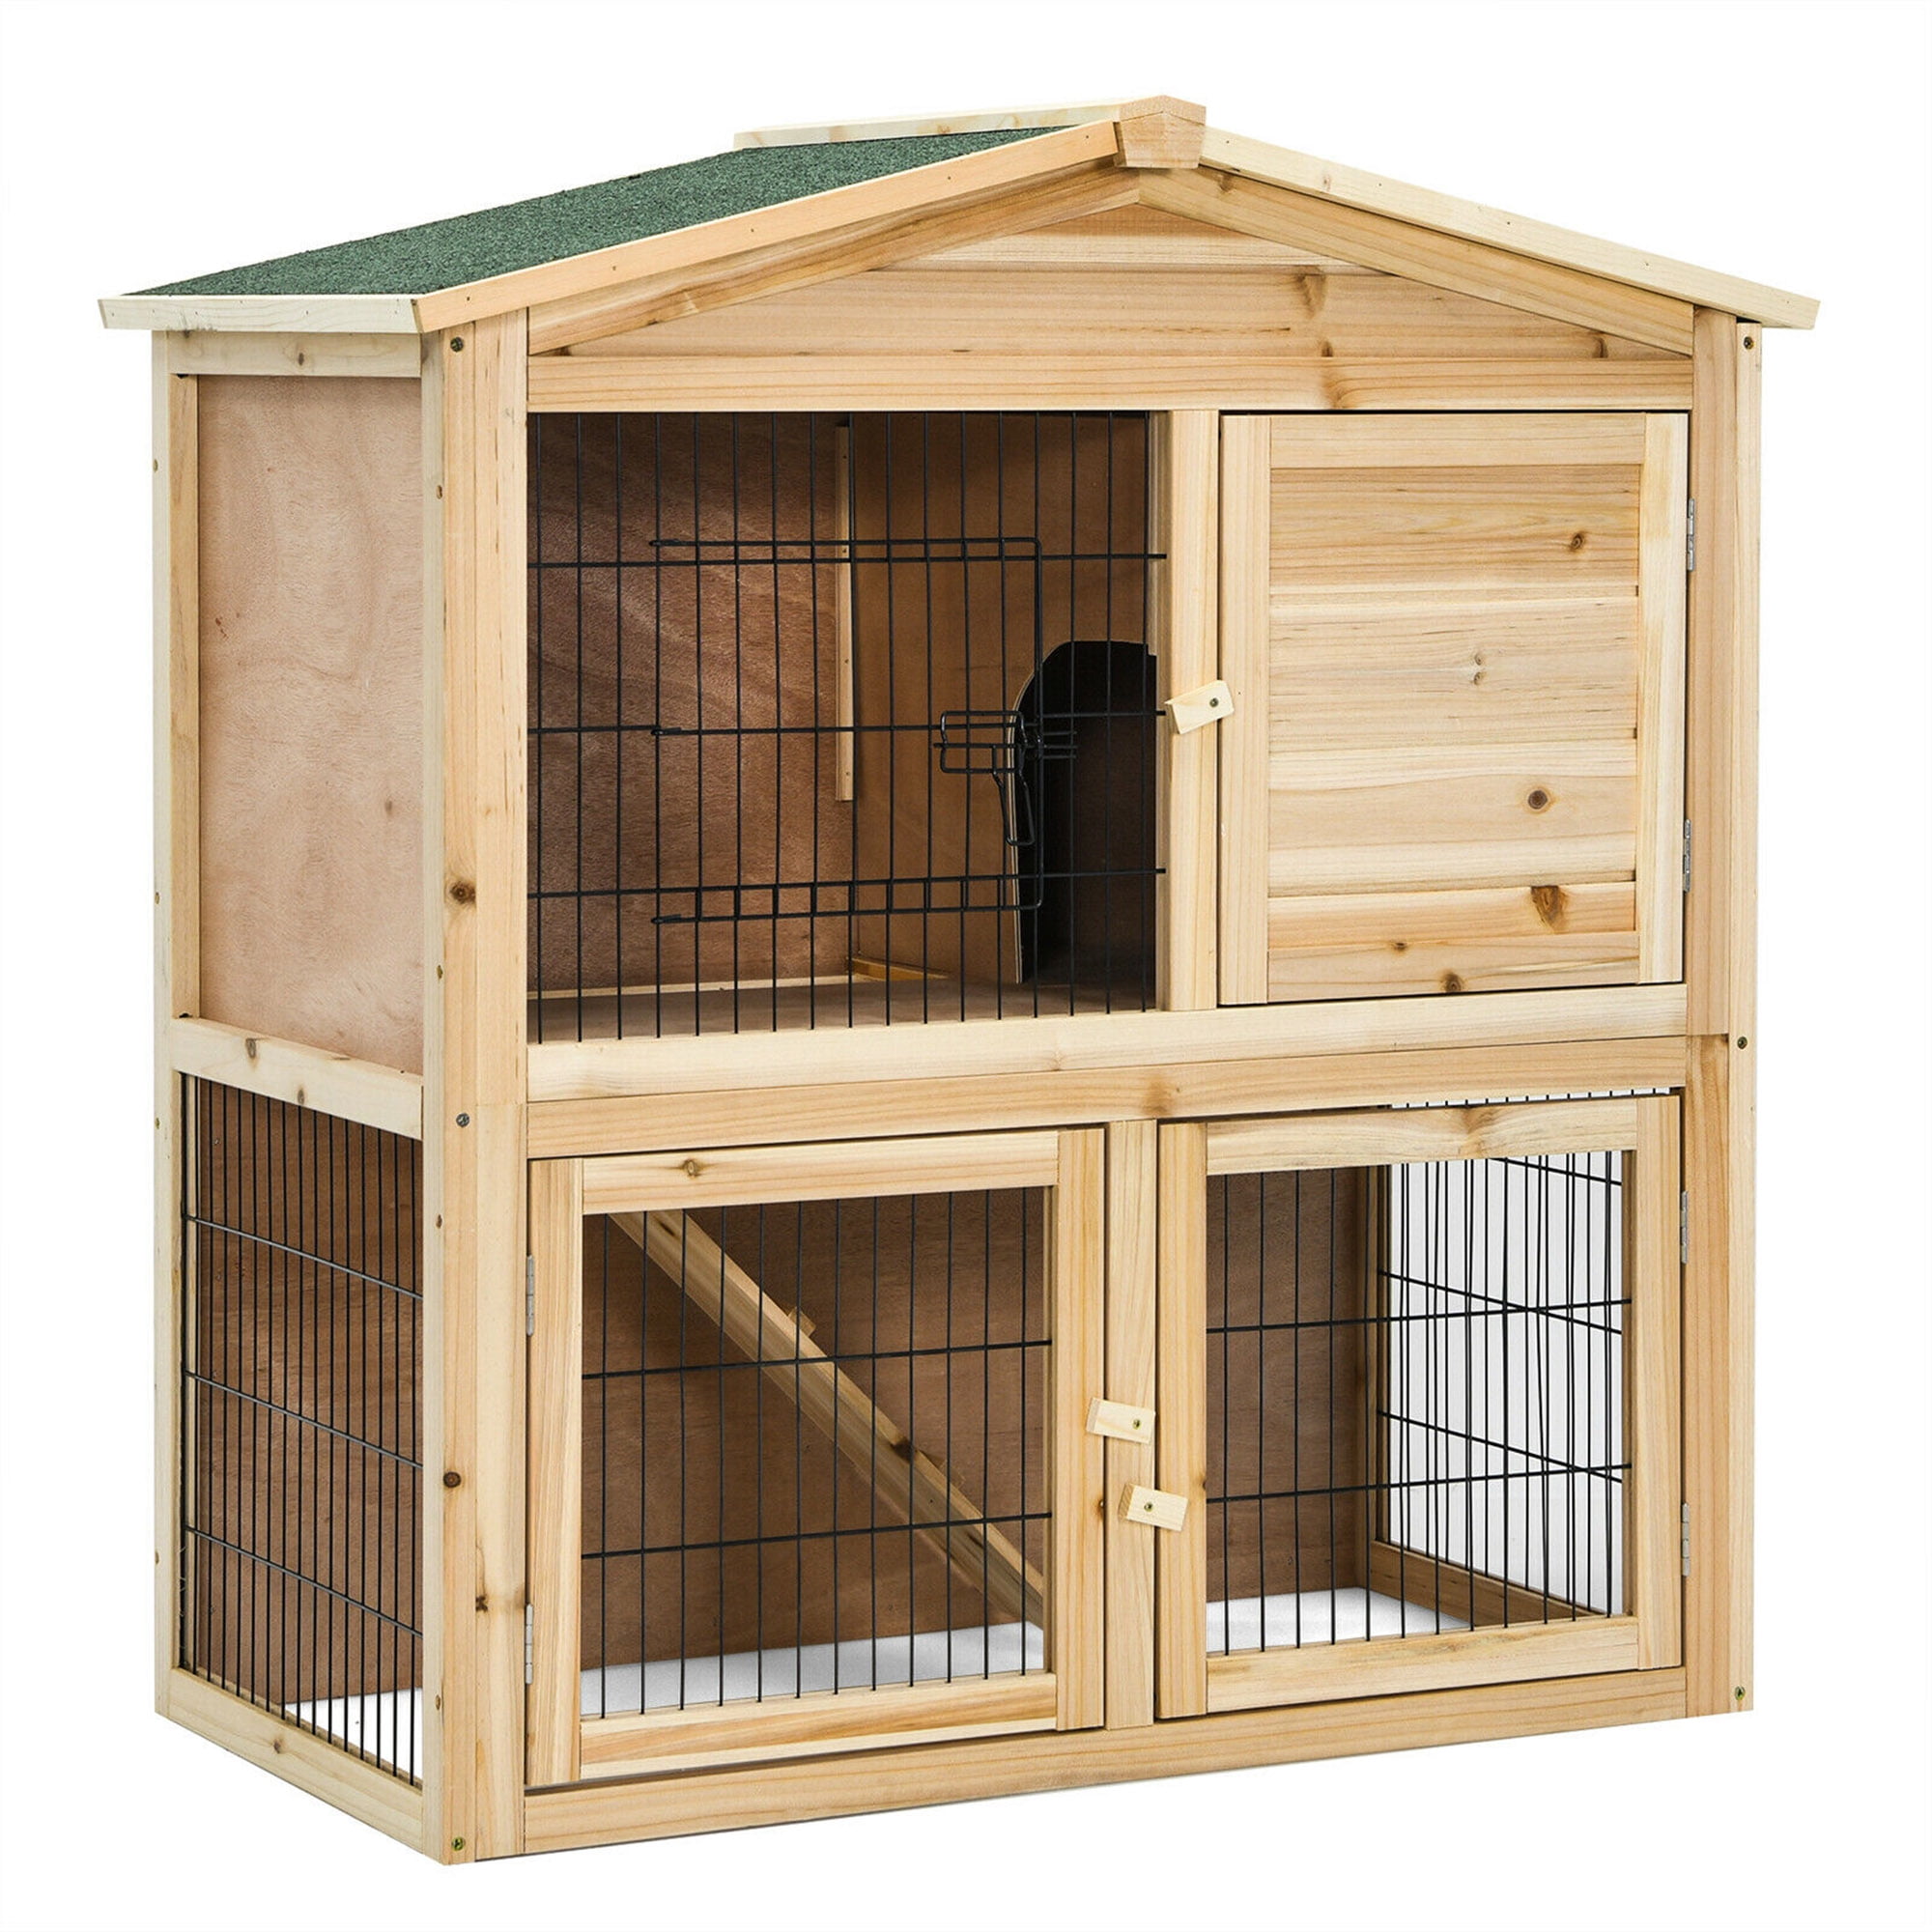 54.3 inches U-MAX Rabbit Hutch Large Chicken Coop Wooden Rabbit House Rabbit Cage Bunny House Outdoor with Open Roof Removable Tray & Ramp 